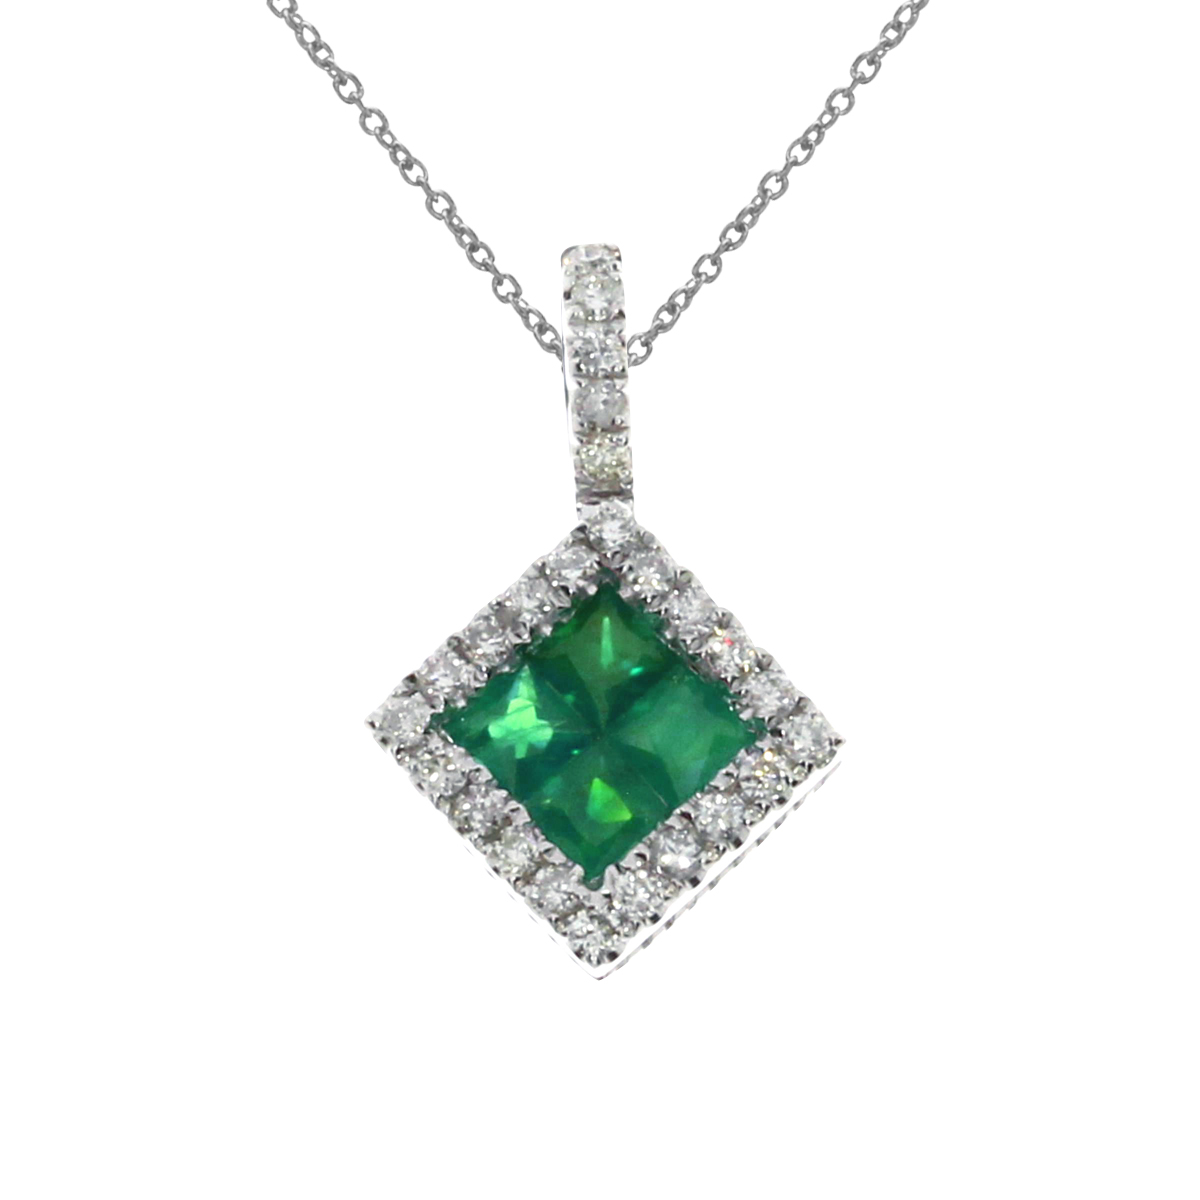 This sparkling pendant features four priness cut emeralds and .14 ct diamonds set in 14k white gold.